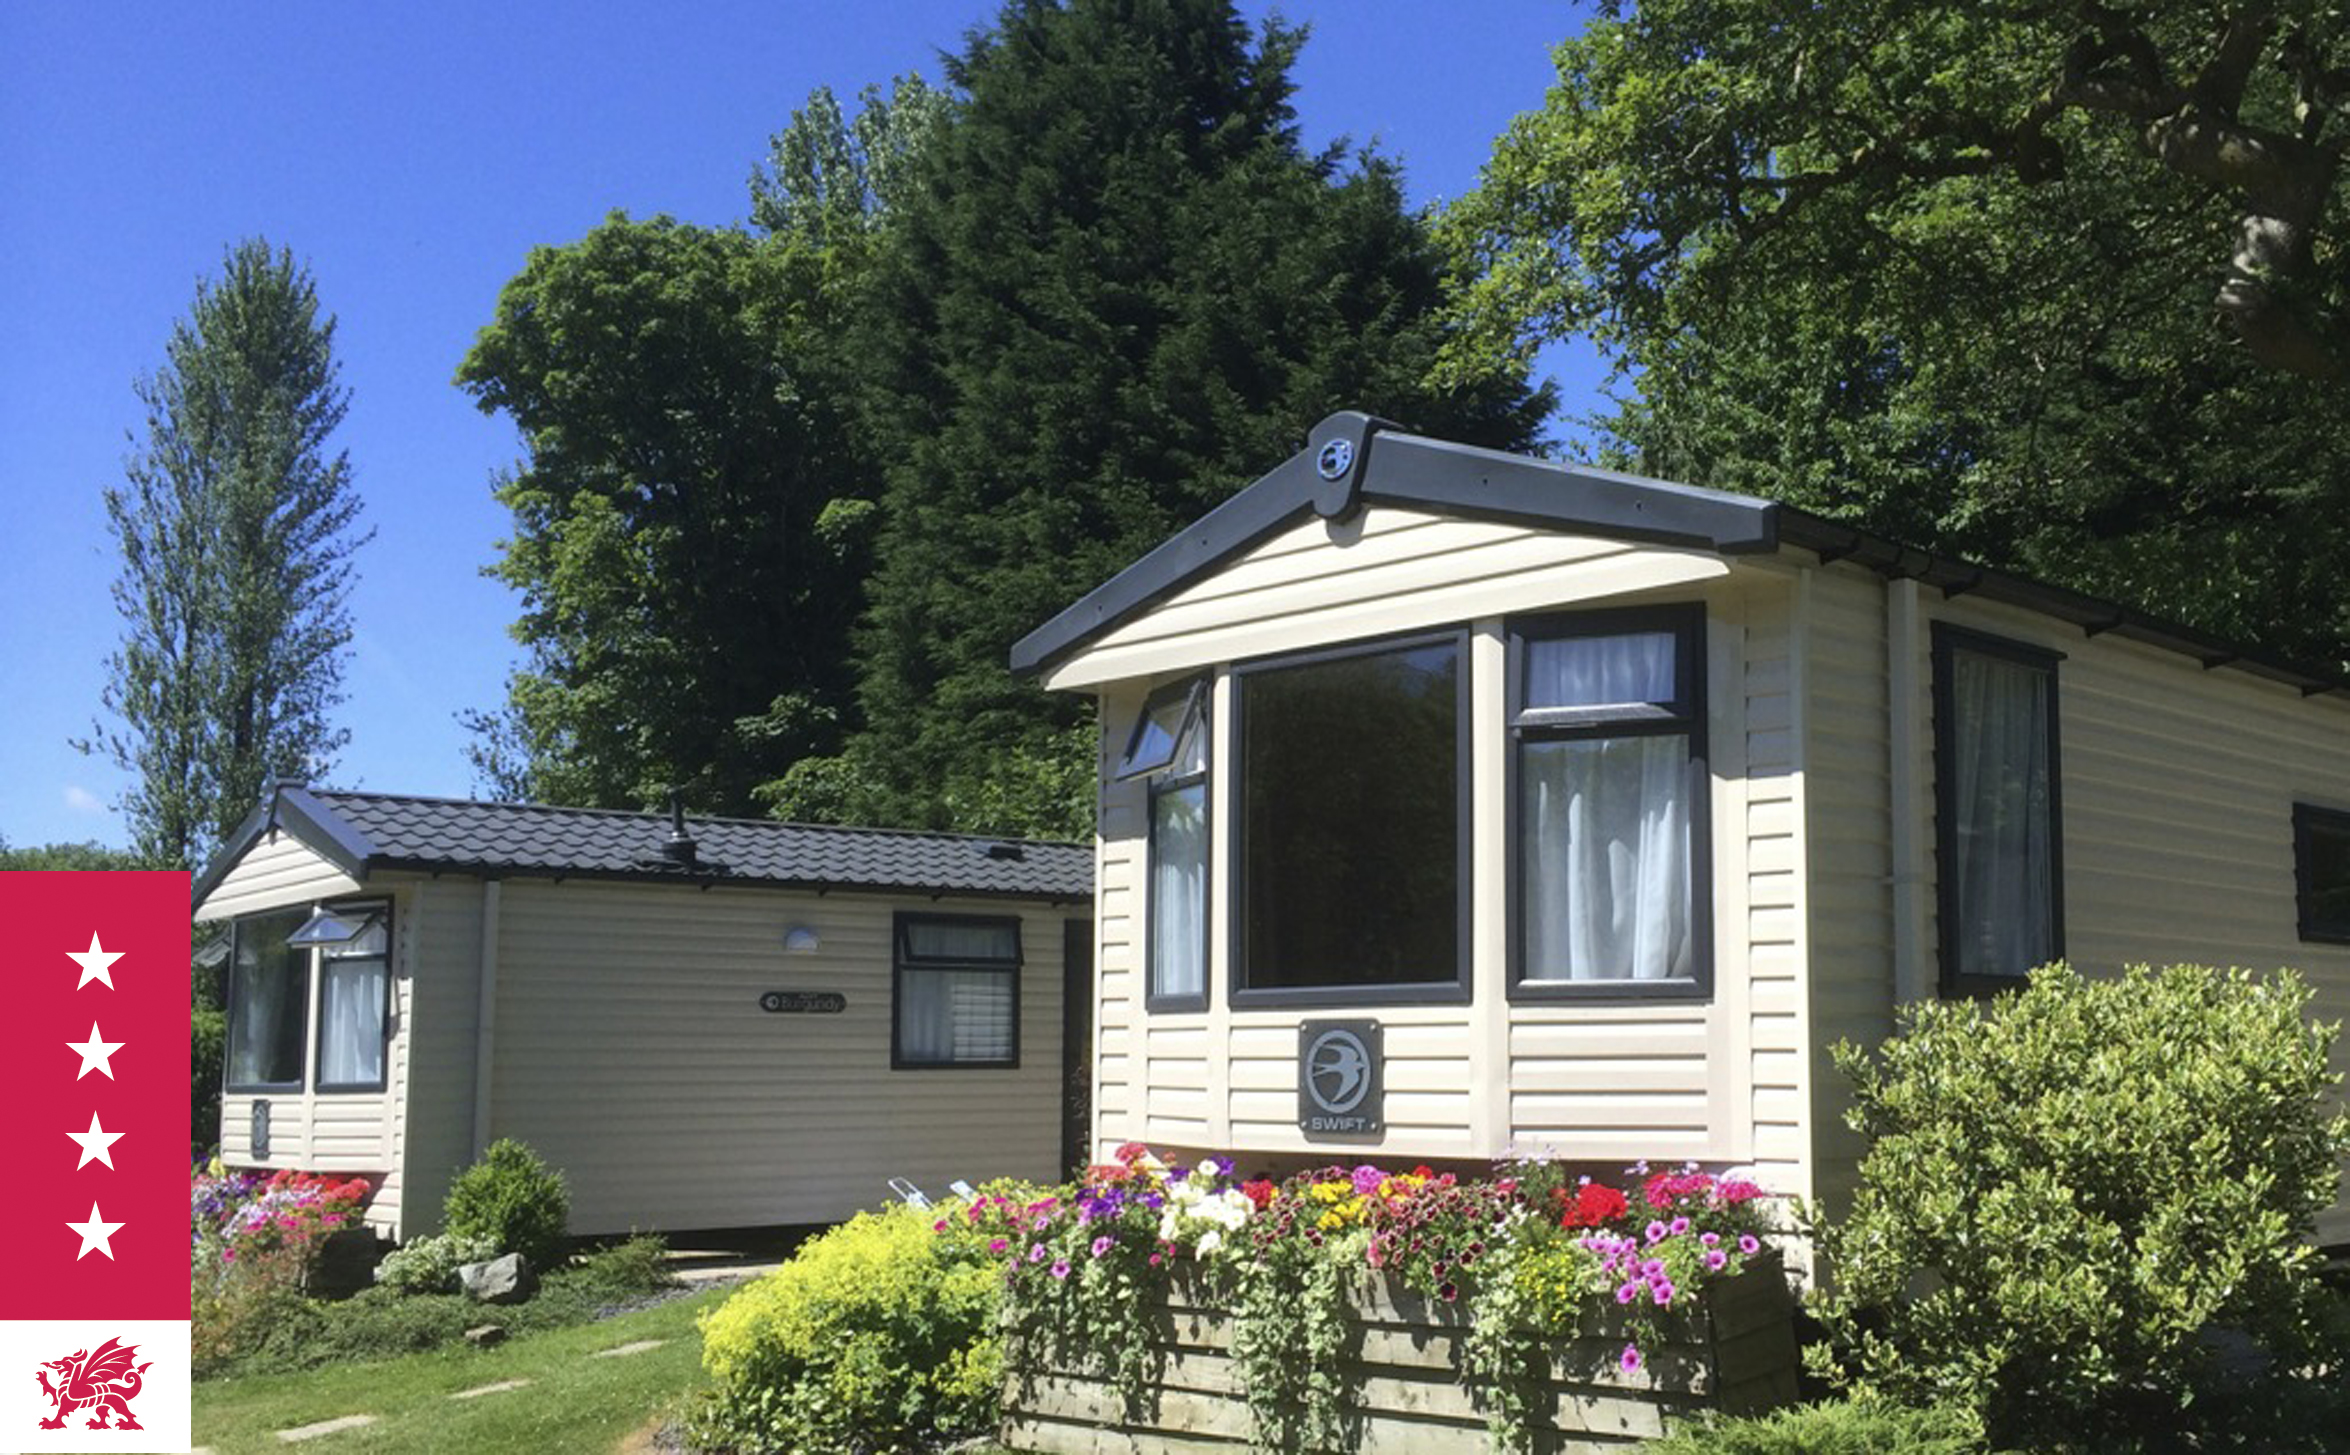 Great reviews for our caravan park holidays in Pembrokeshire